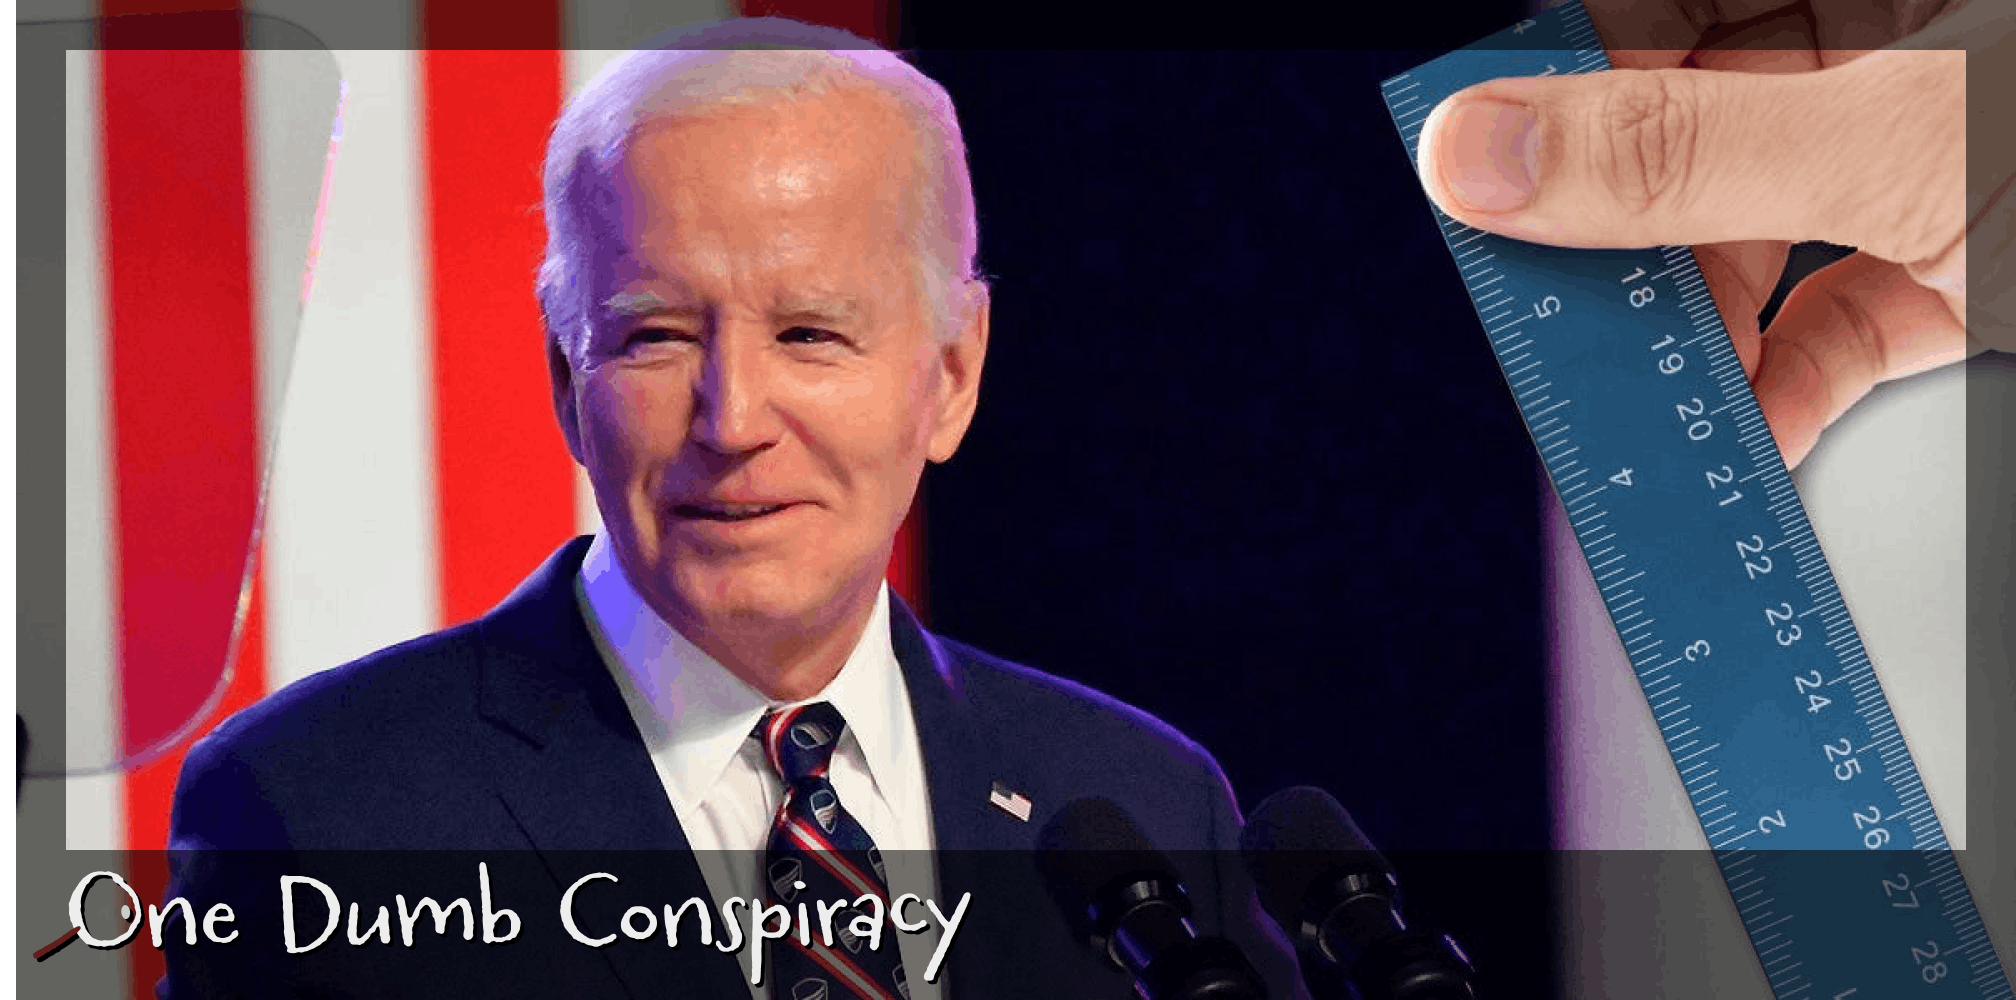 After debunked ‘Biden is dead’ rumors, conspiracy theorists now think he’s suspiciously taller